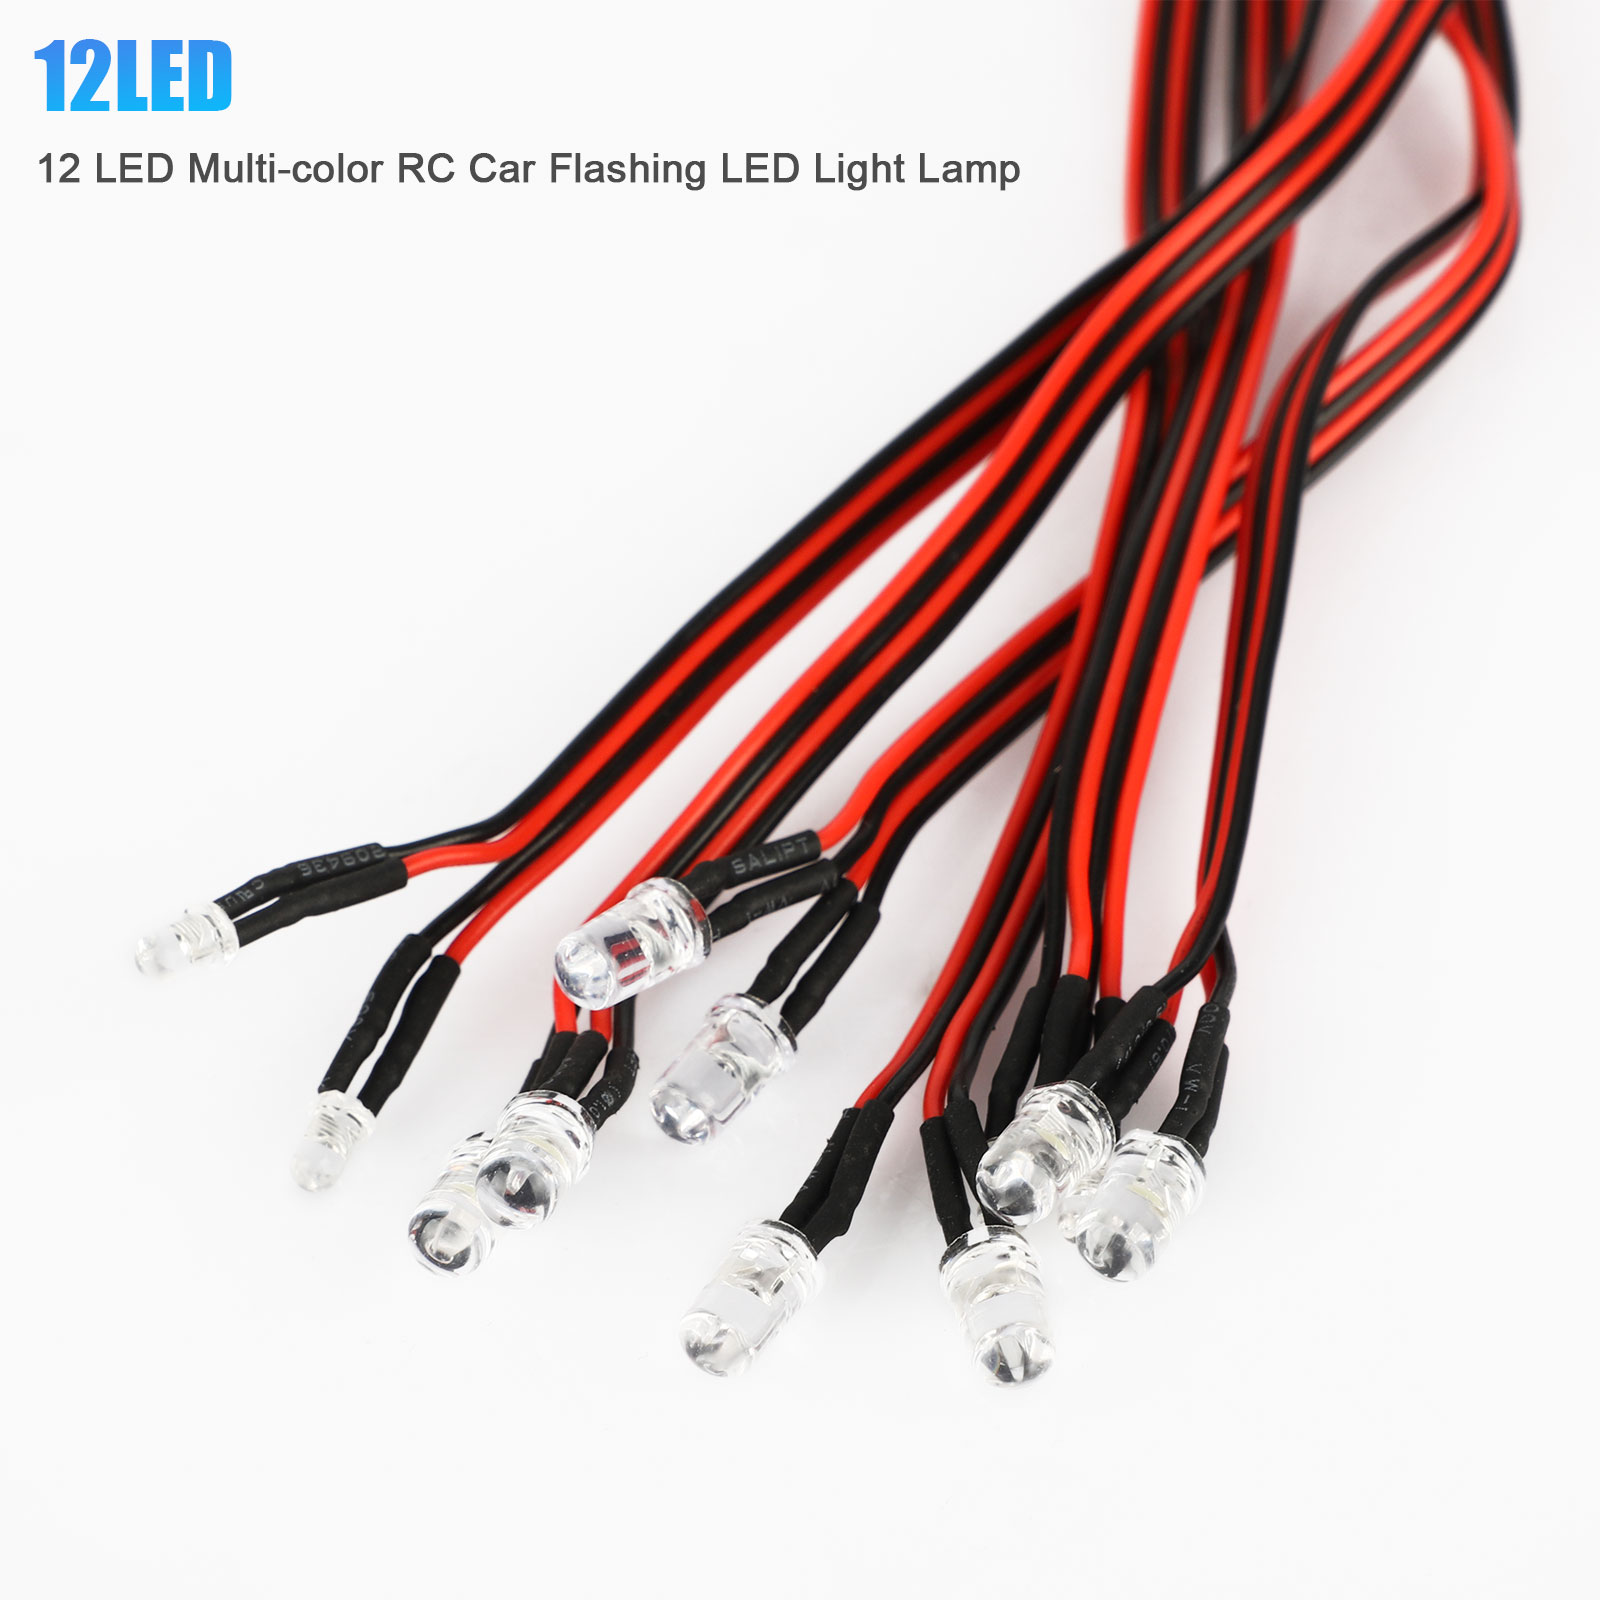 Details about   12 LED Flashing Light Headlight Taillight Lamp Set For 1:10 RC Car Truck Crawler 